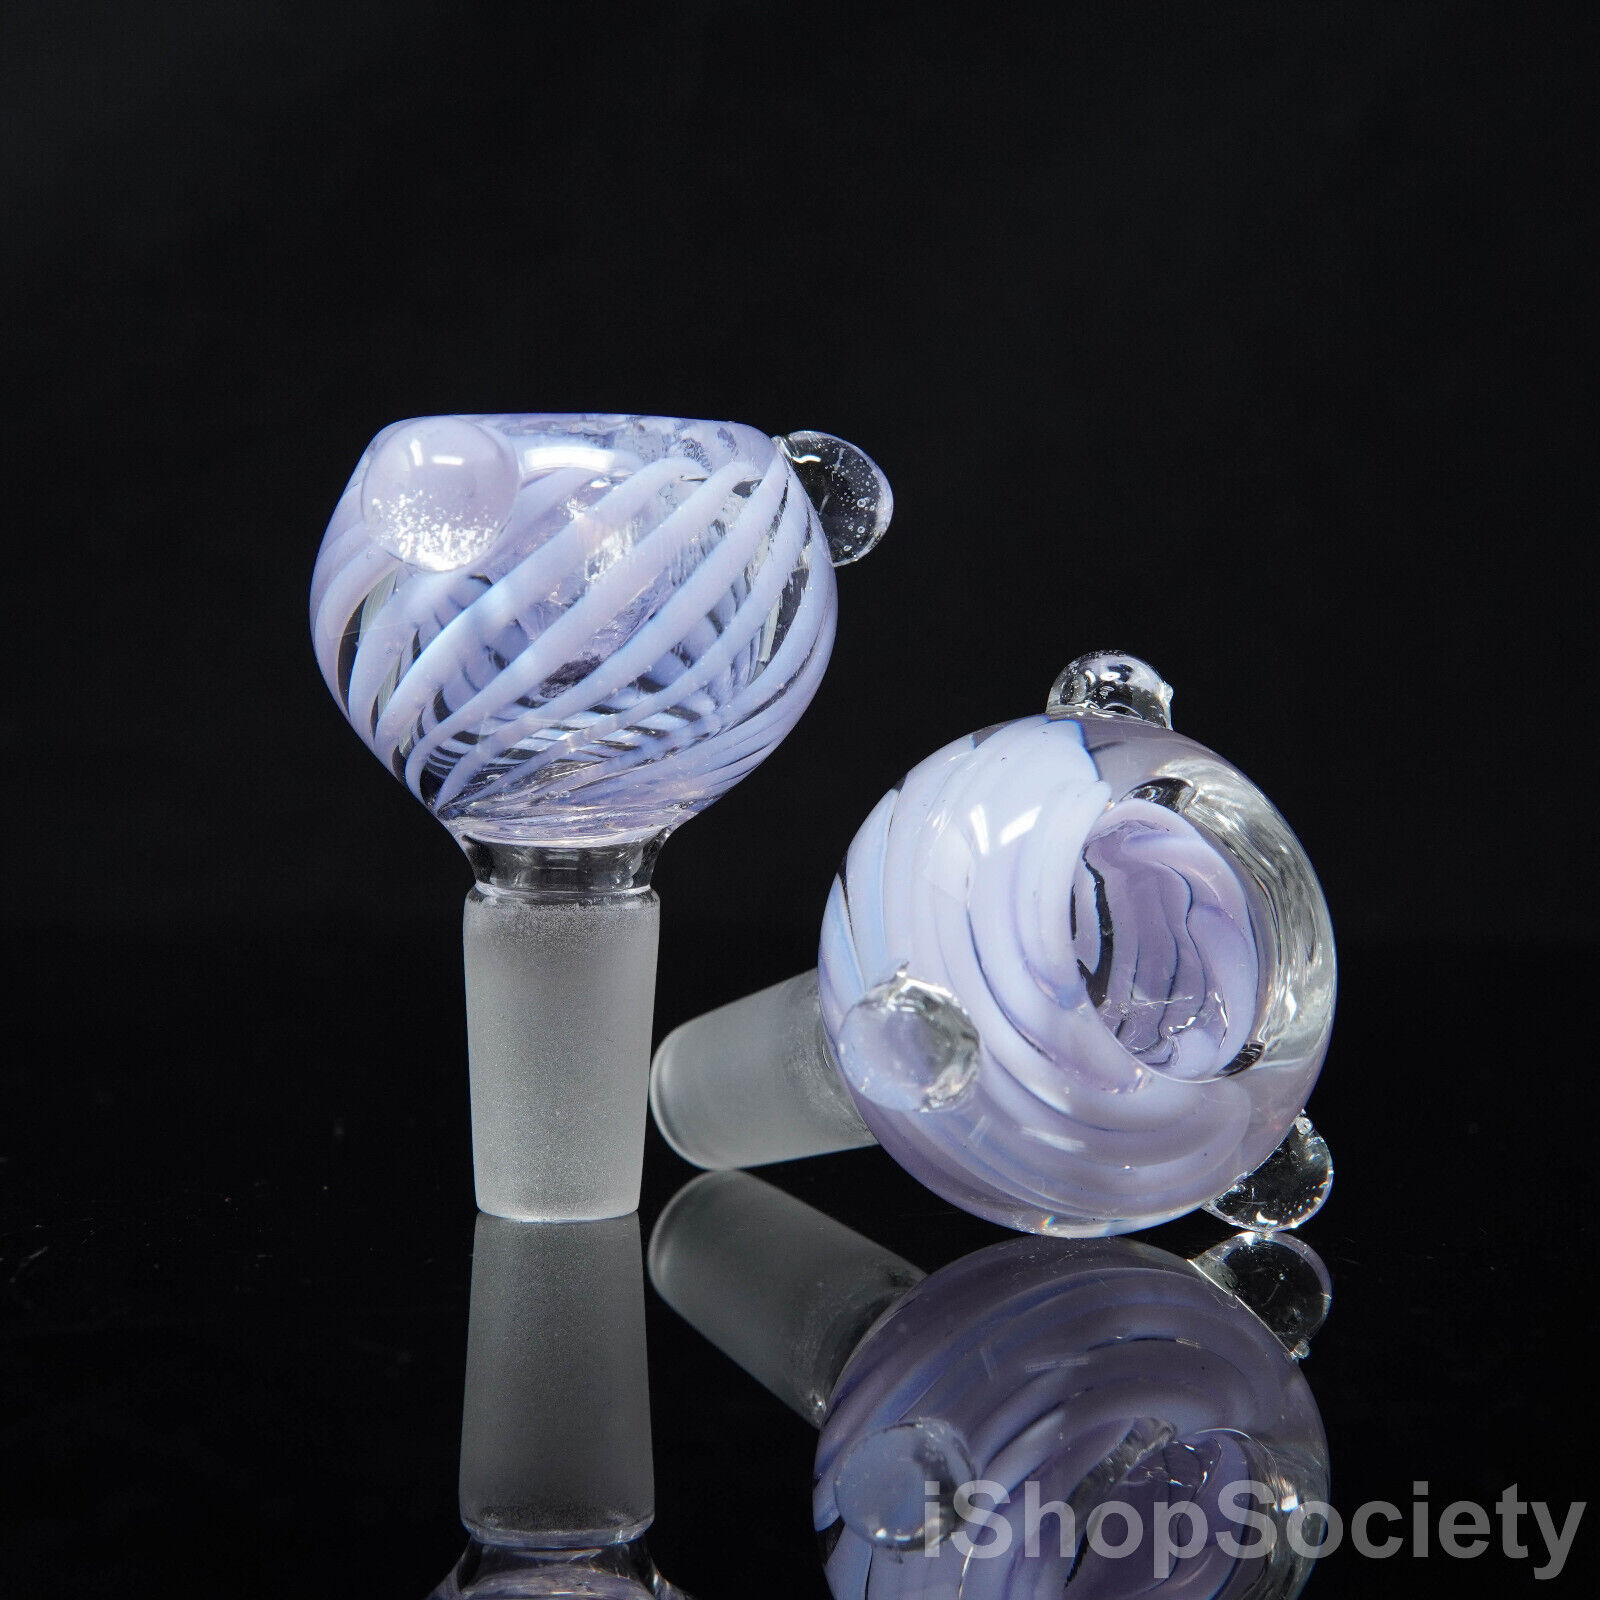 Neon Slime Slide Bowl 14mm Water Pipe Hookah Head Piece Thick Bowl - P644A. Available Now for 10.99